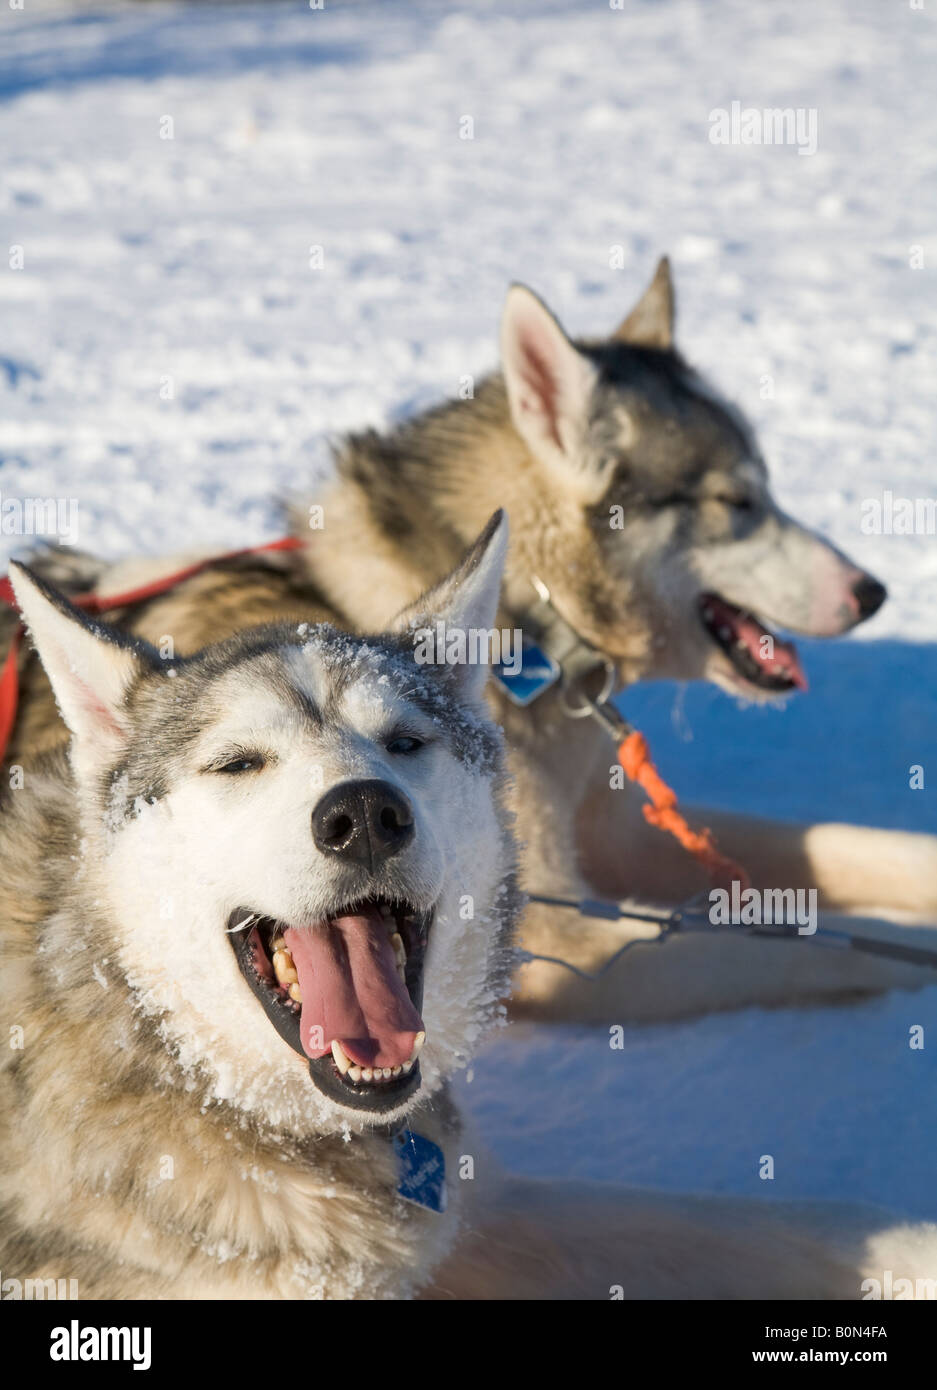 Two siberian huskies in winterly Lapland / northern Sweden Stock Photo